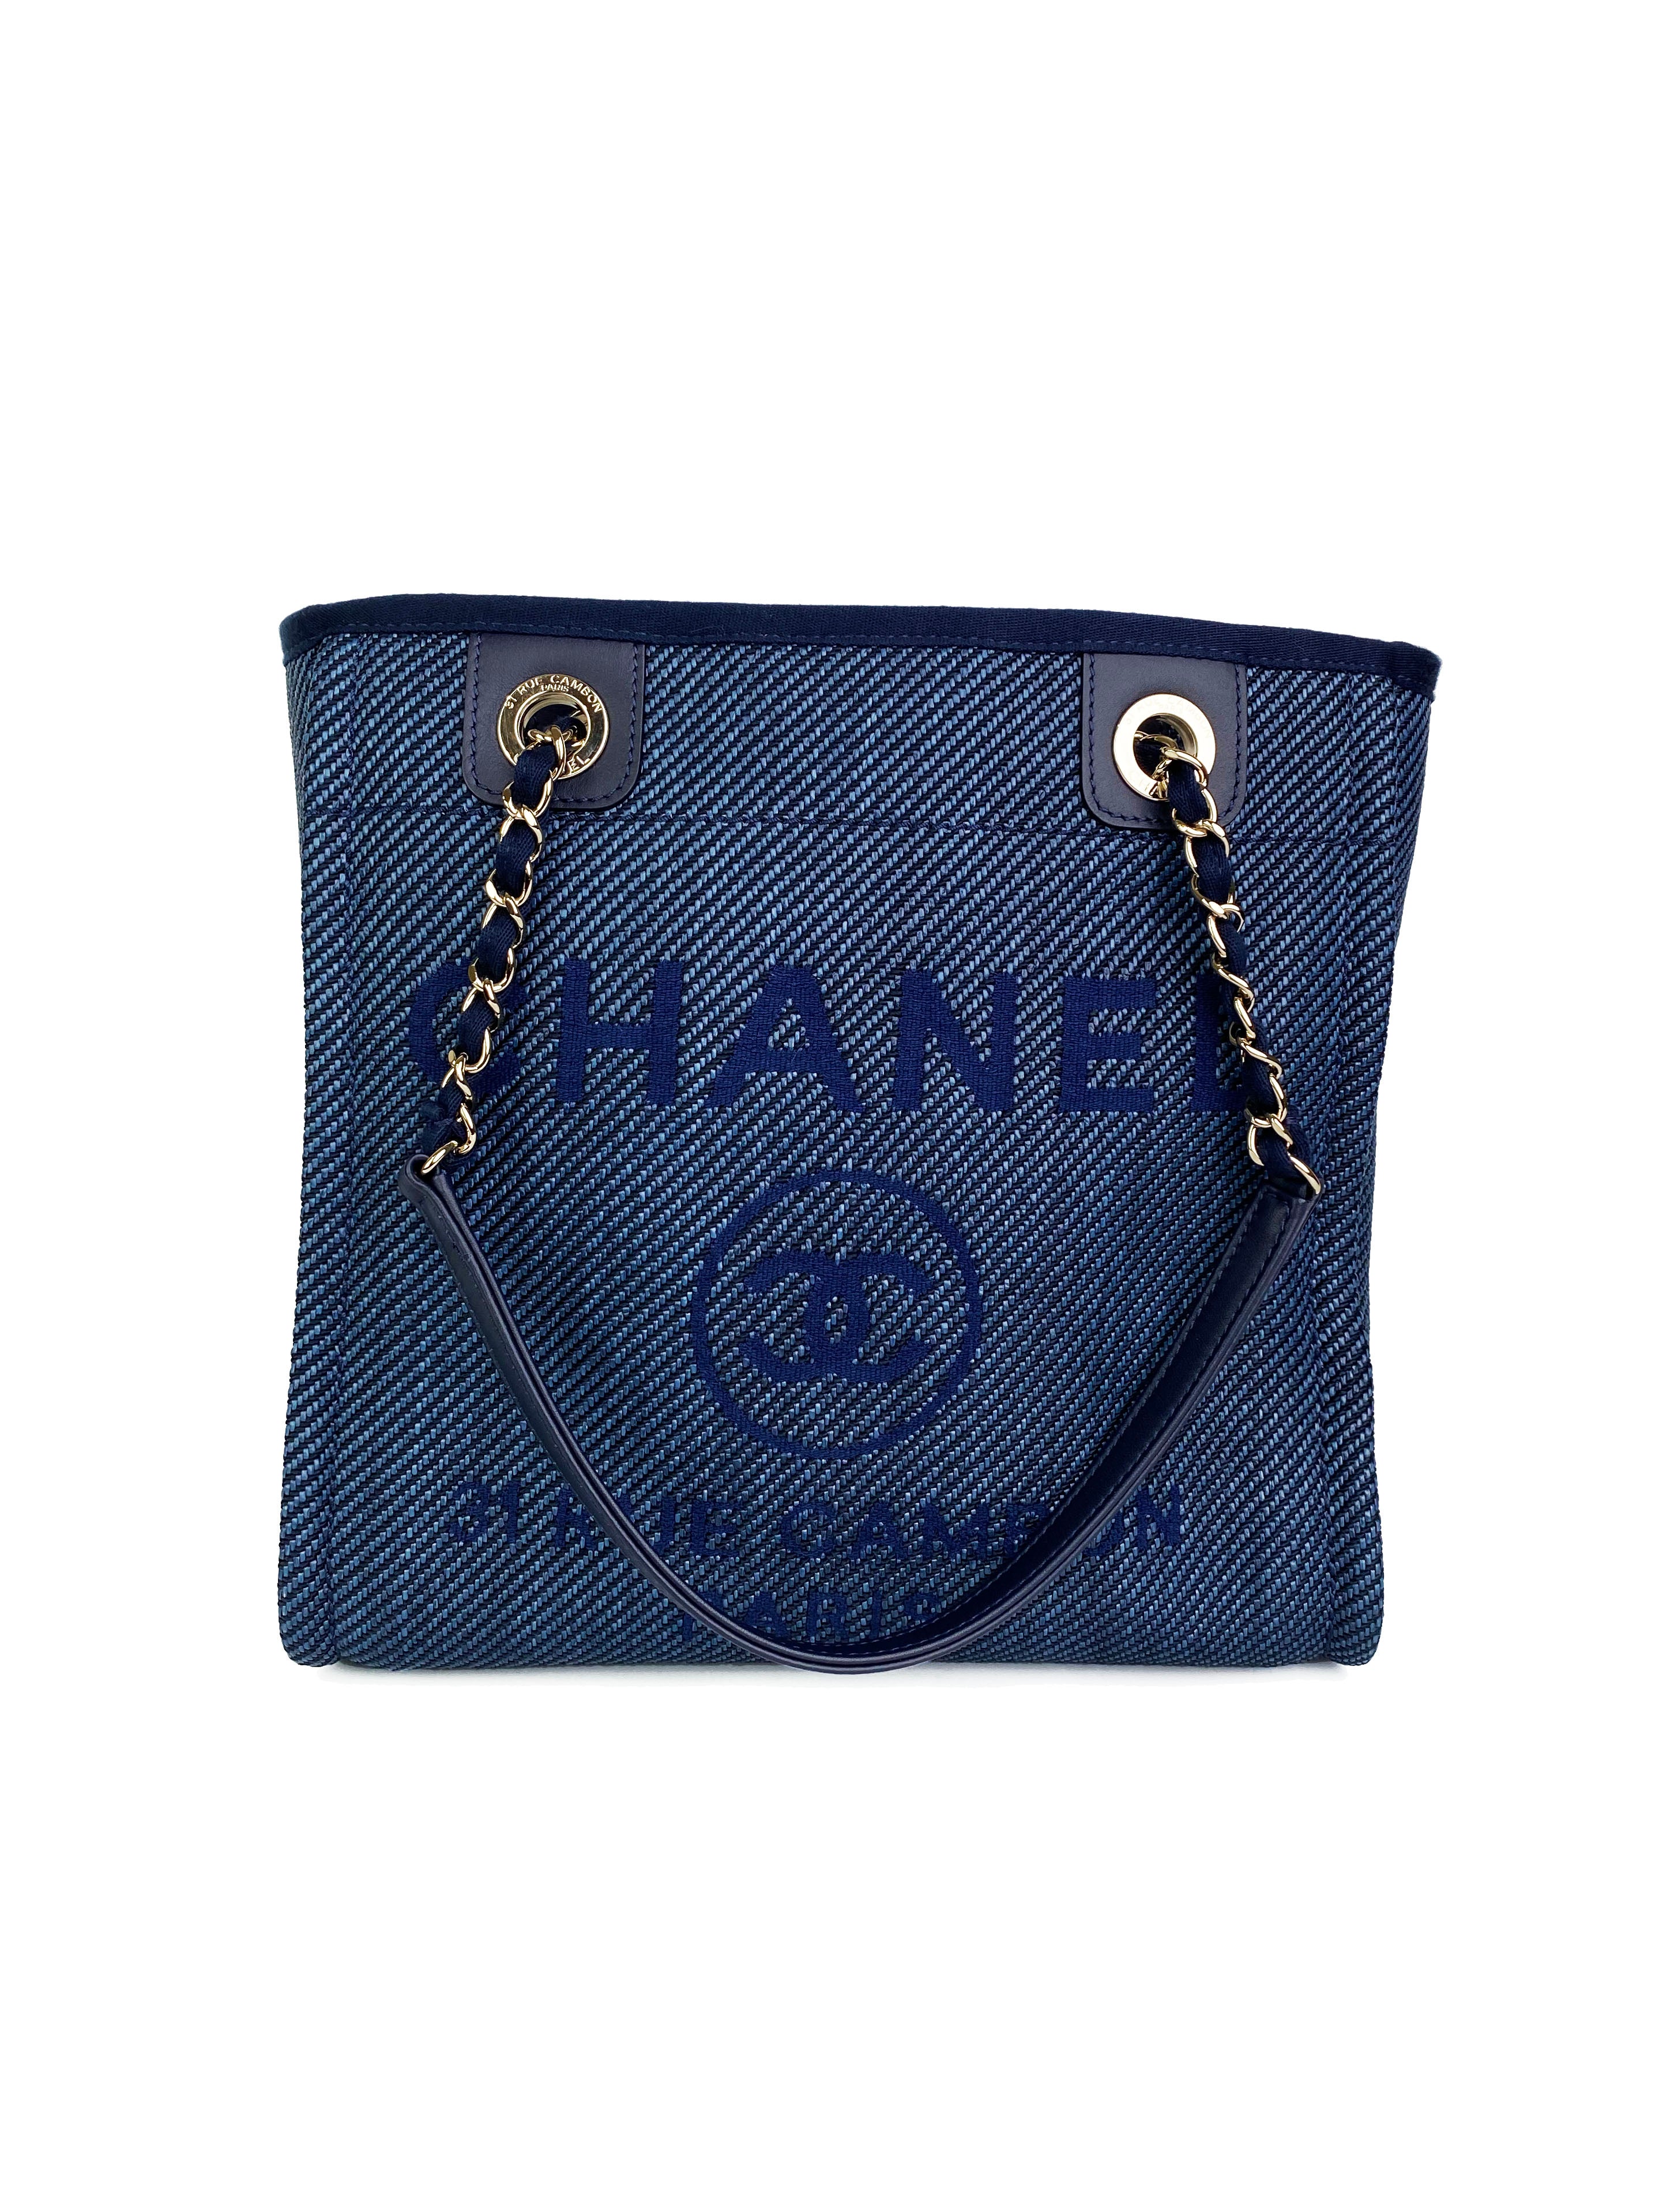 Chanel Blue Denim Style Deauville Tote Bag